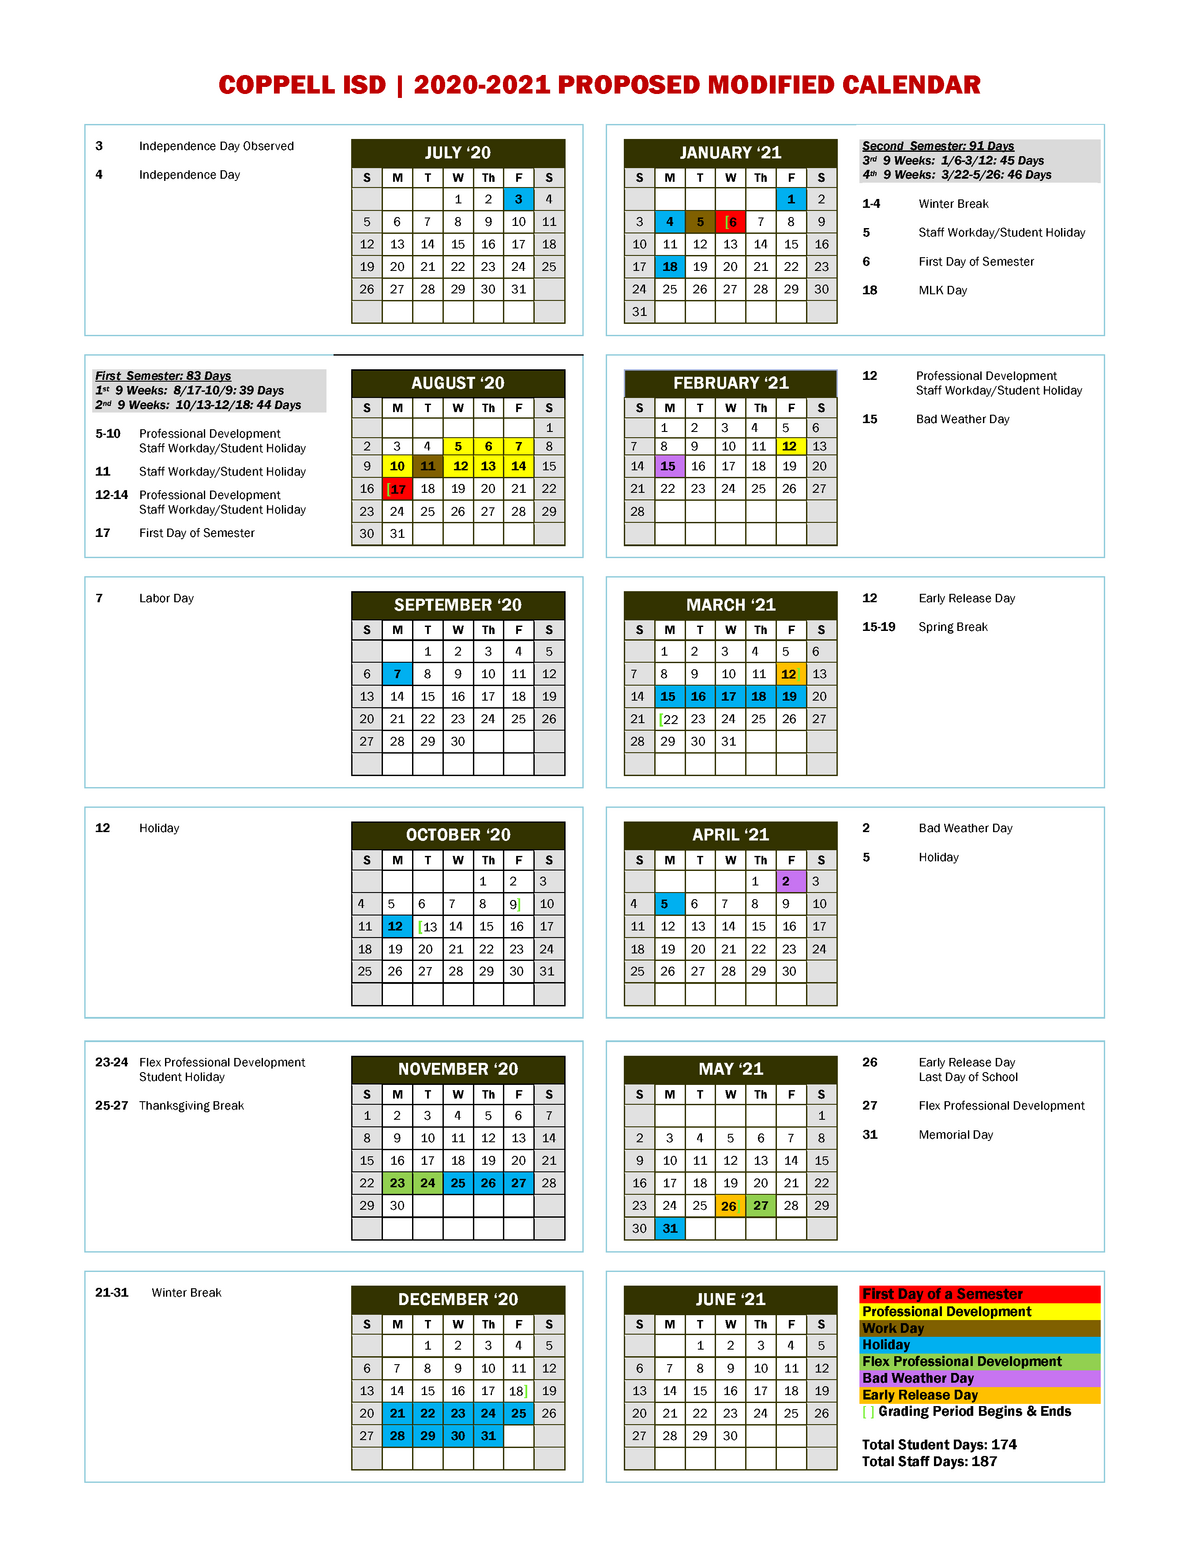 2020-2021-proposed-modified-calendar-coppell-isd-2020-2021-proposed-modified-calendar-3